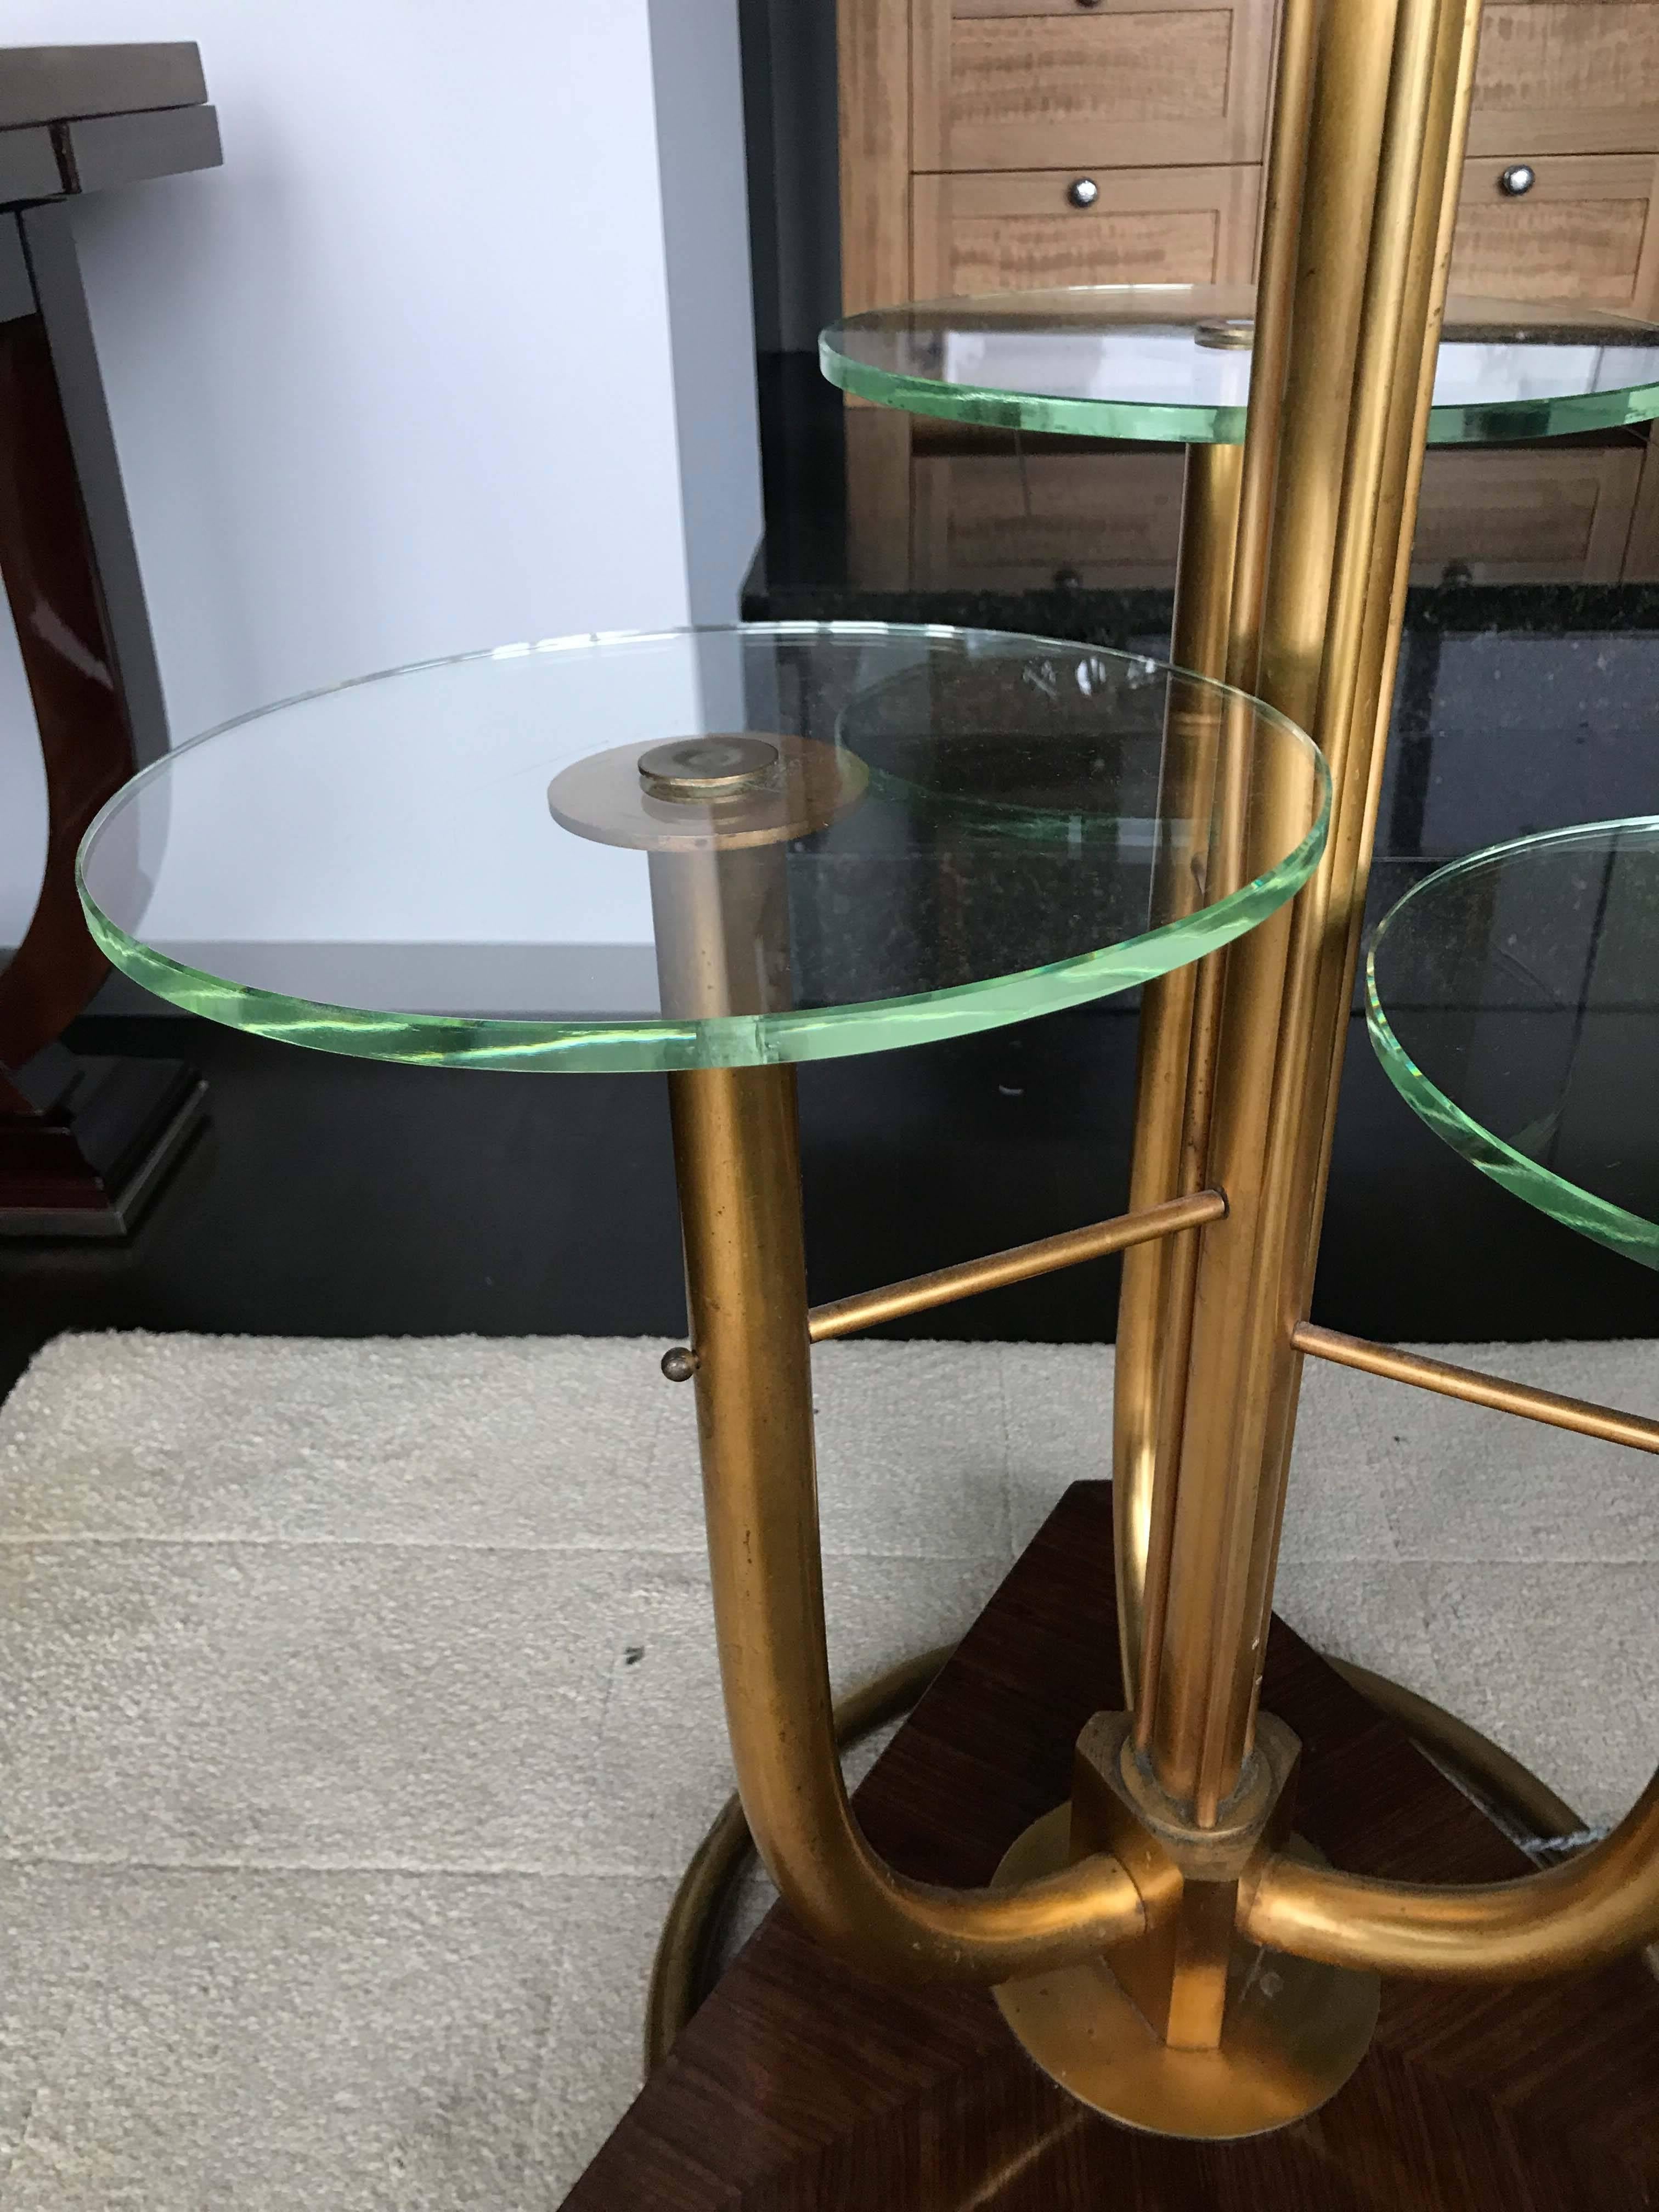 Unusual brass floor lamp with layered glass tables integrated into the base. Very good vintage condition with minor wear consistent with age and use.